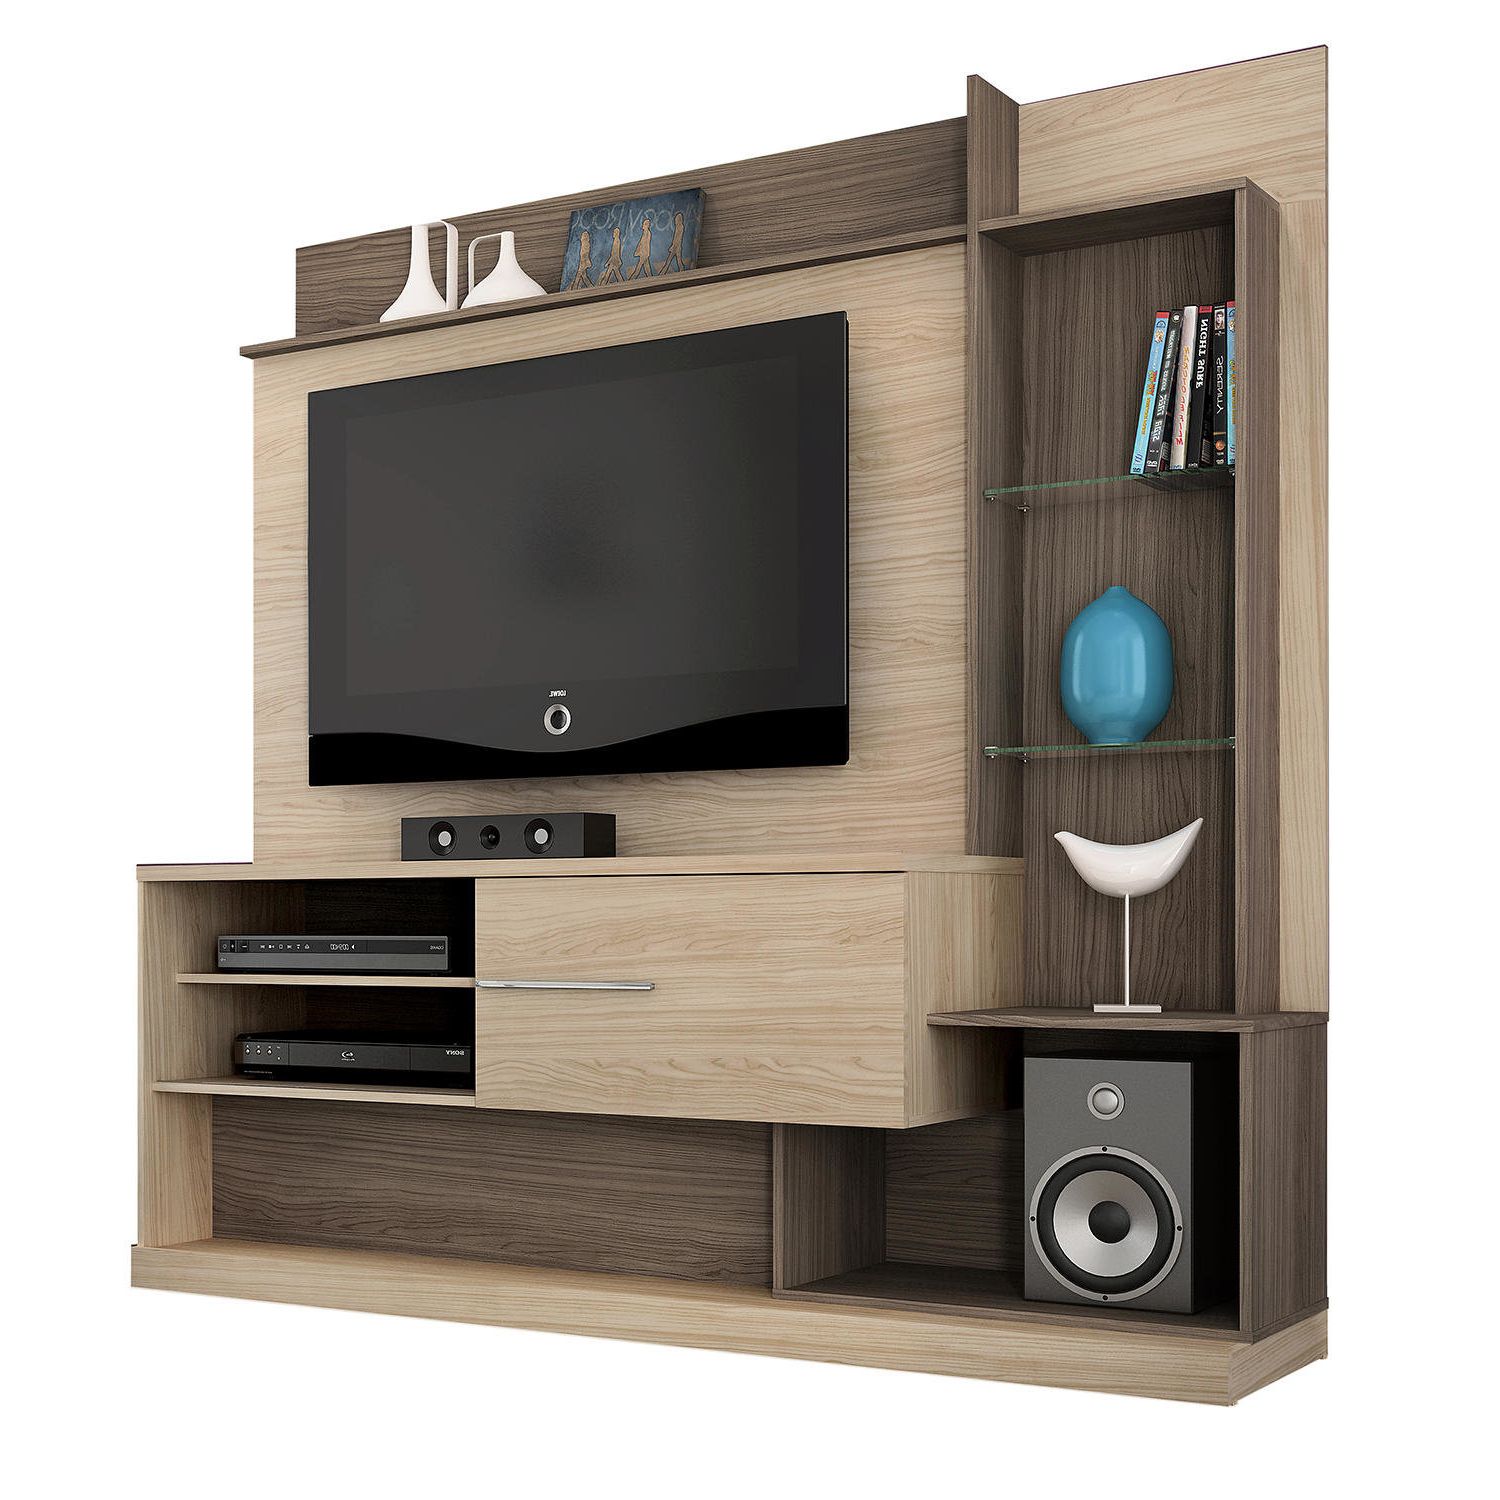 40 Cool Tv Stand Dimension And Designs For Your Home Within Priya Tv Stands (View 10 of 21)